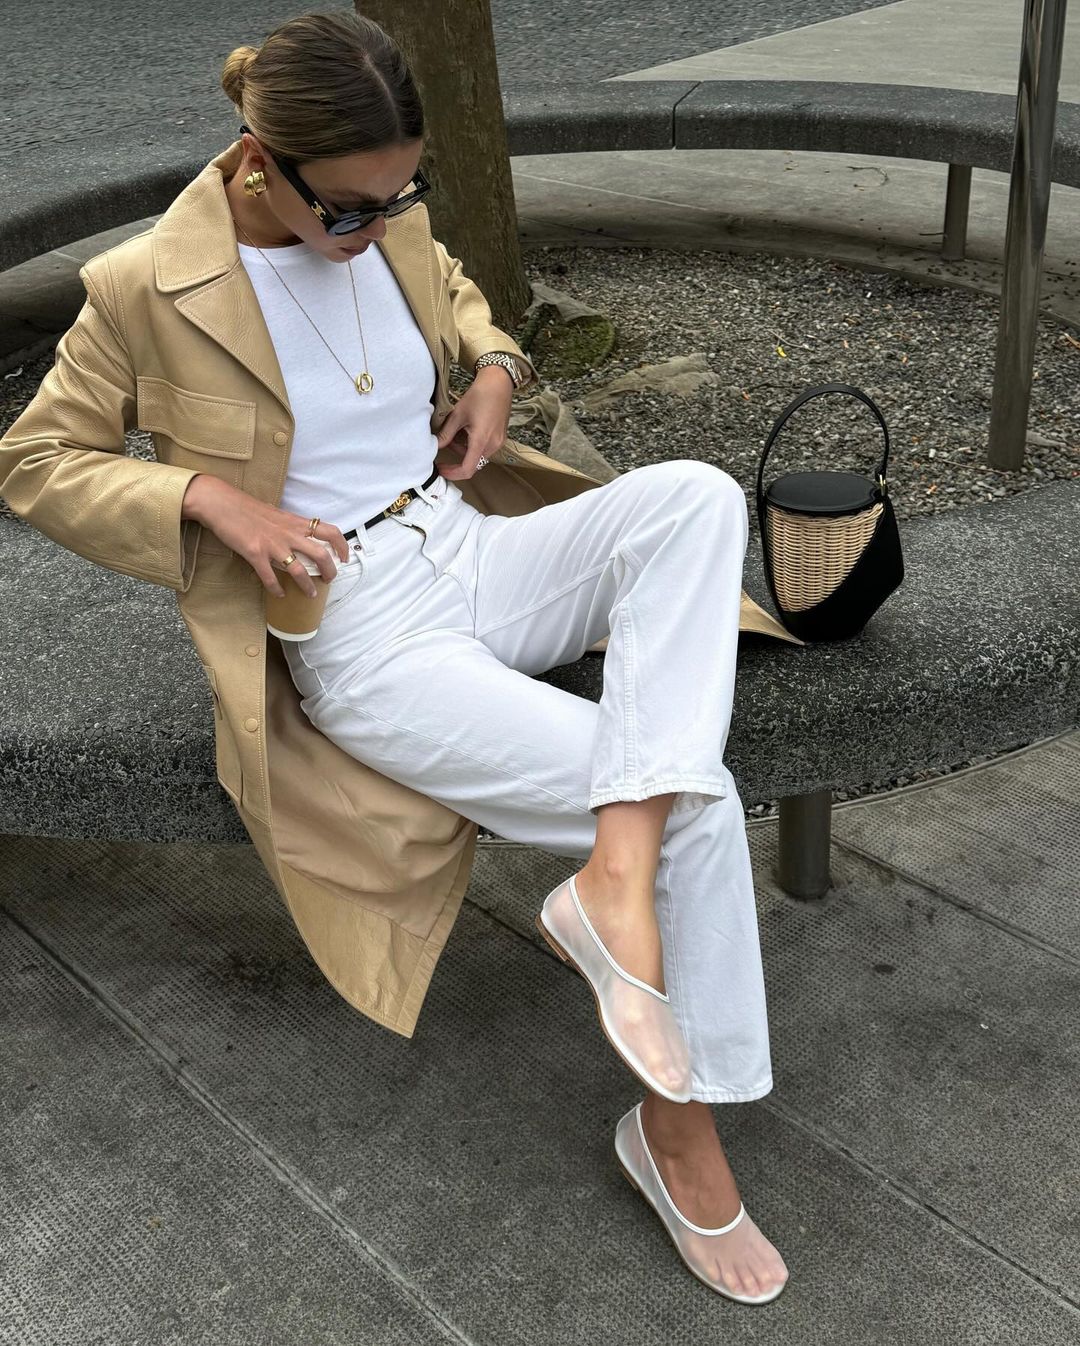 Mesh Flats Are Key To Creating An Interesting Outfit